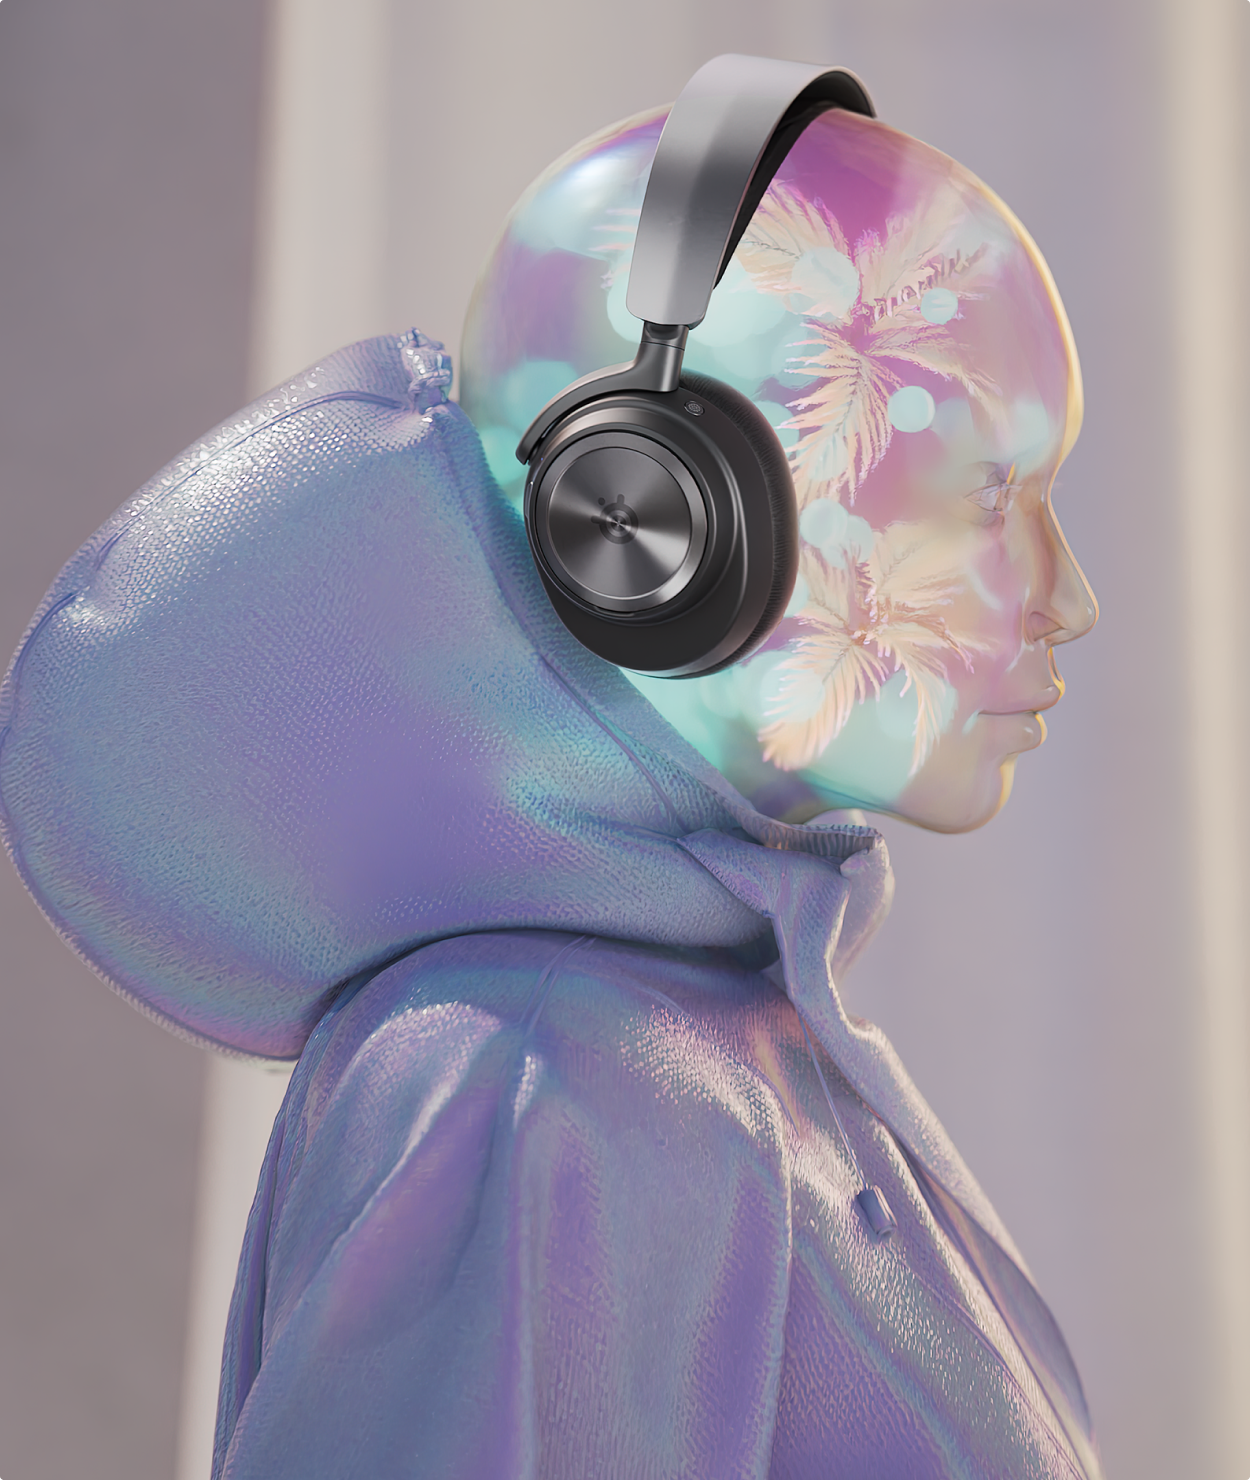 An abstract being with a holographic hoodie and floral, transparent figure wears an Arctis Nova headset.